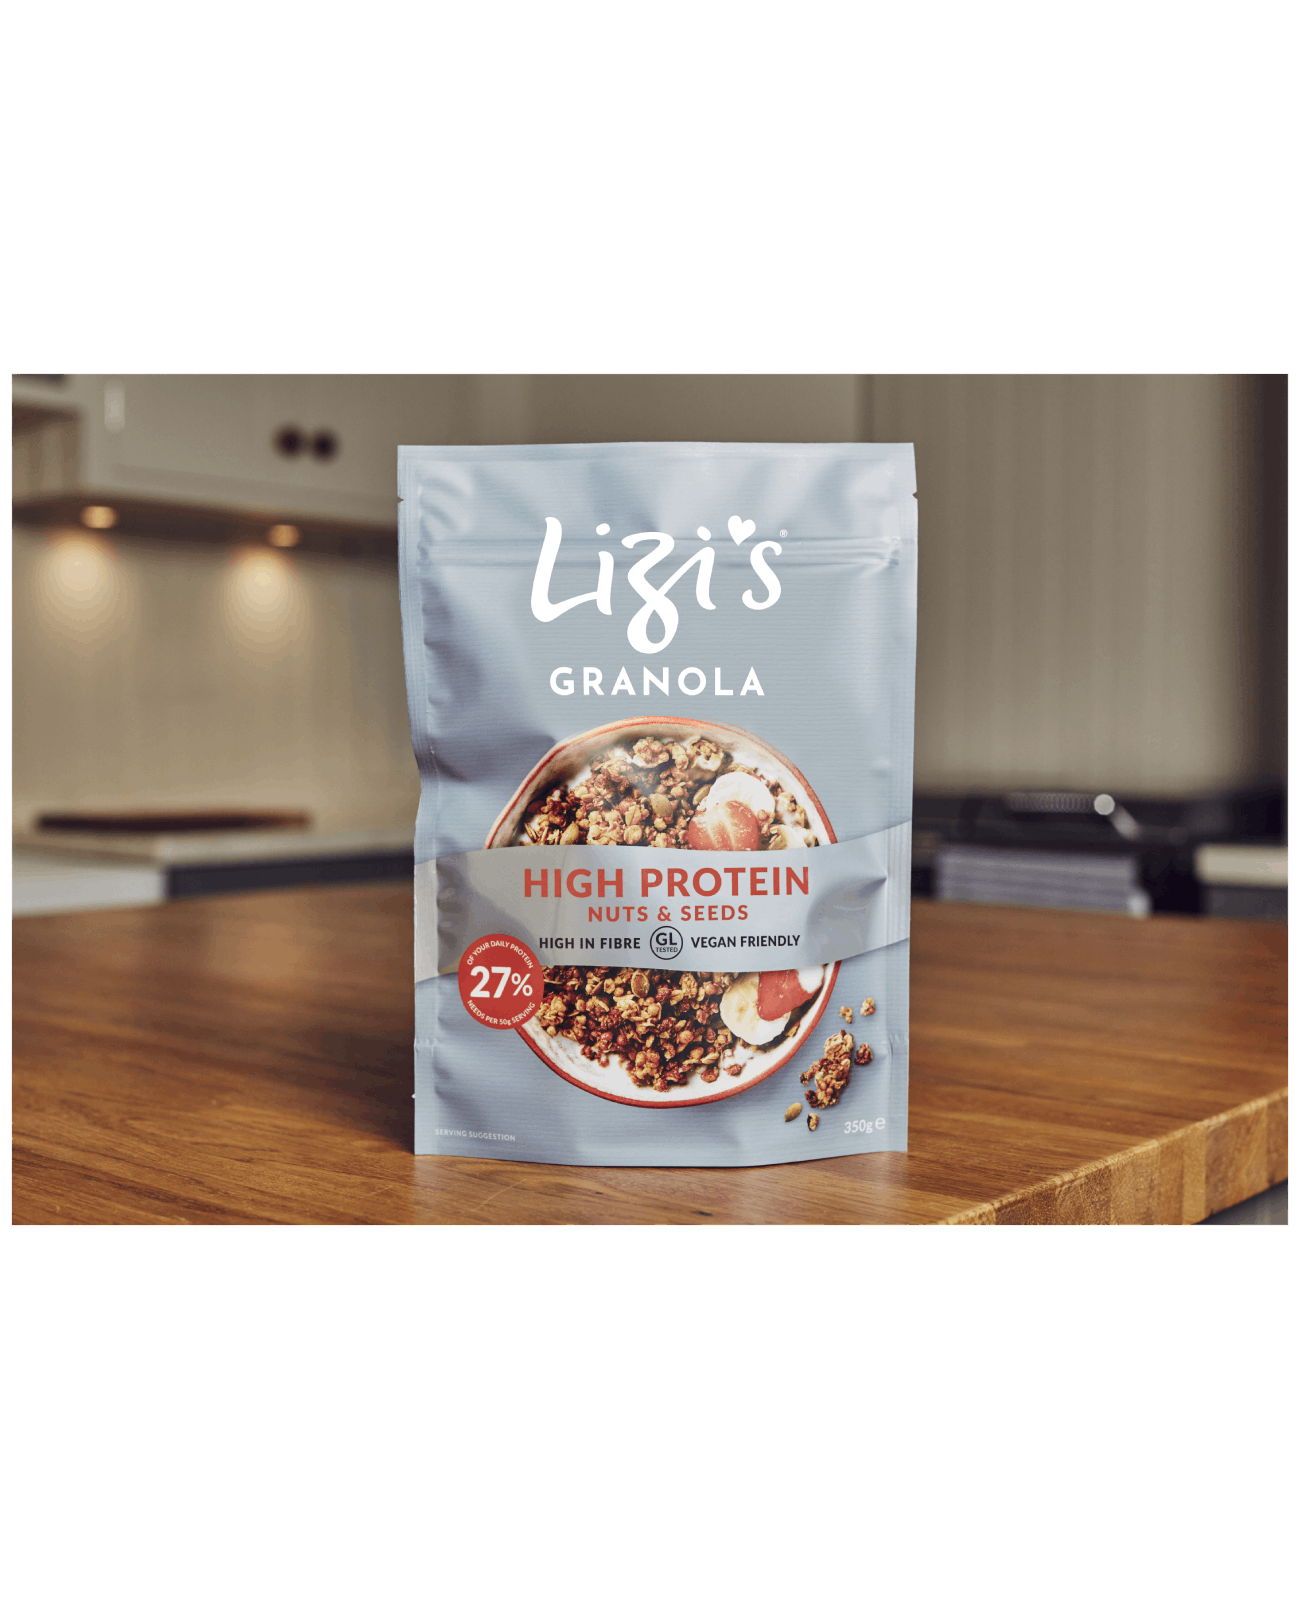 High Protein Nuts and Seeds - Edited